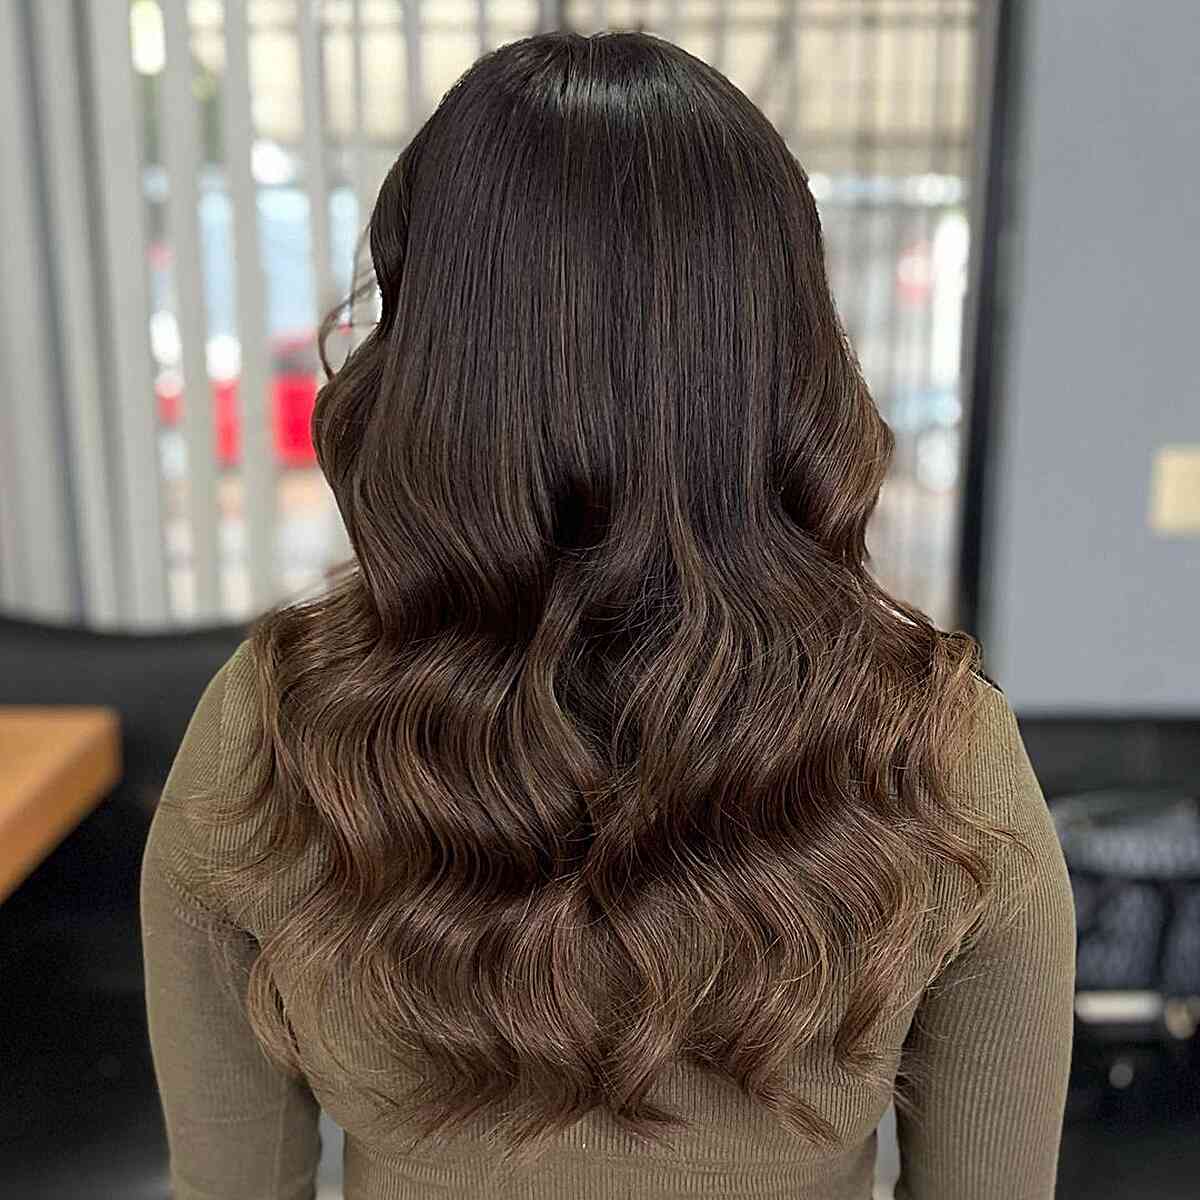 Long Wavy Chocolate Brown Hair Balayage with Lighter Ends